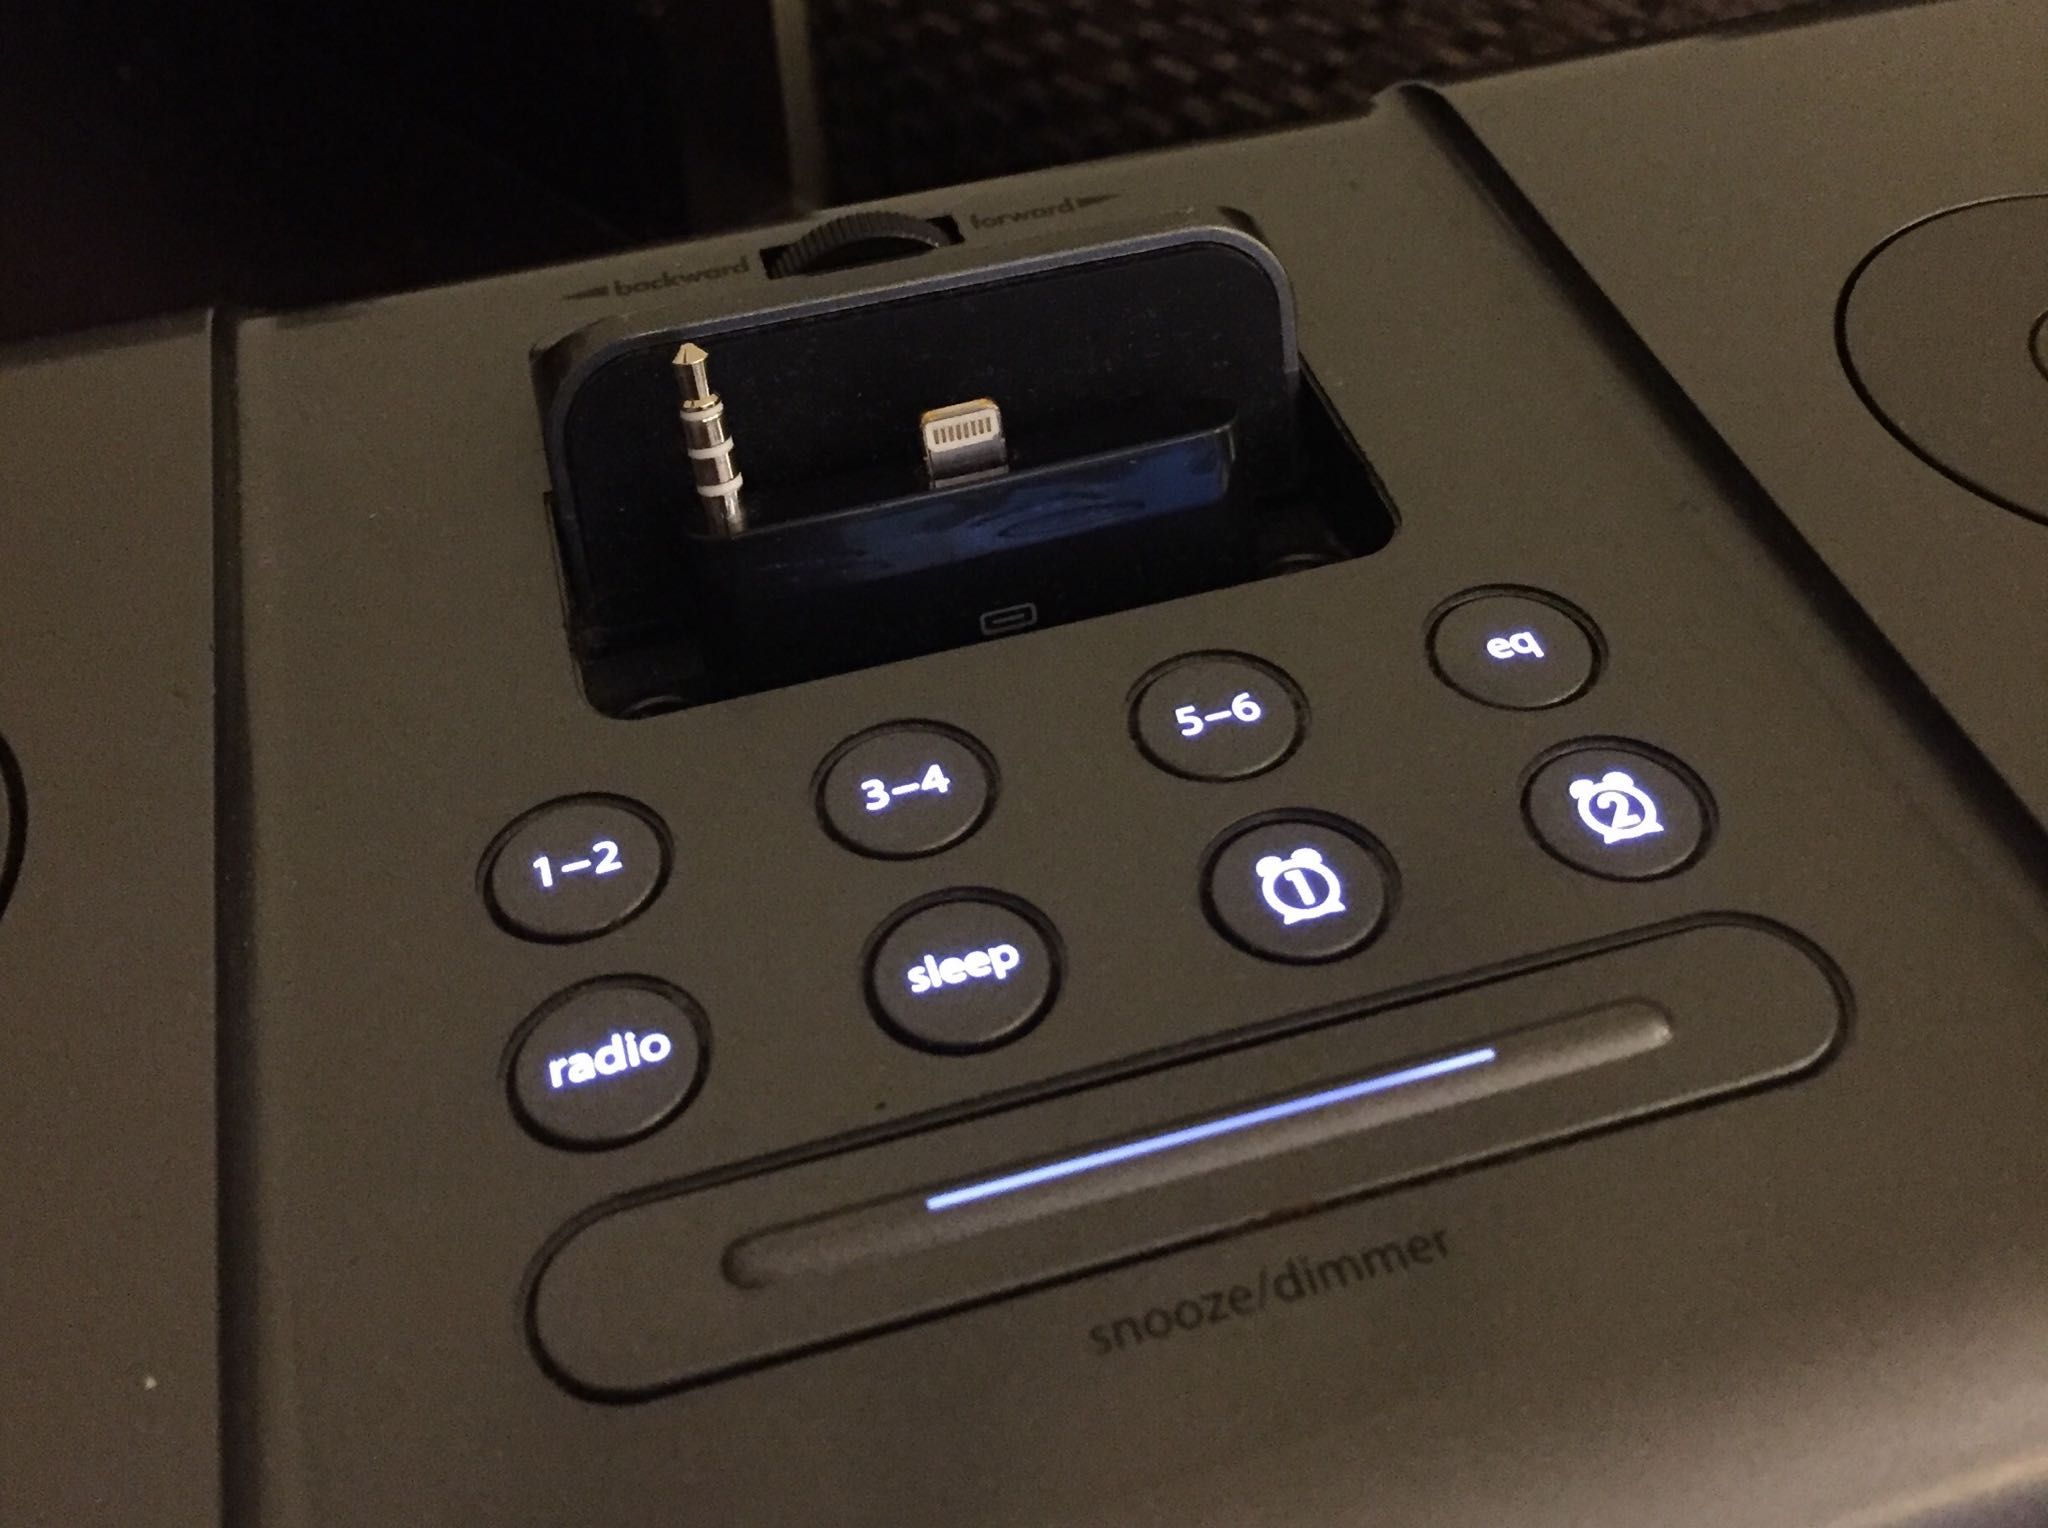 My hotel spent thousands on 25 pin iPhone docks just before Apple switched to lighting ports. A few months ago they finally retrofitted them all with these: